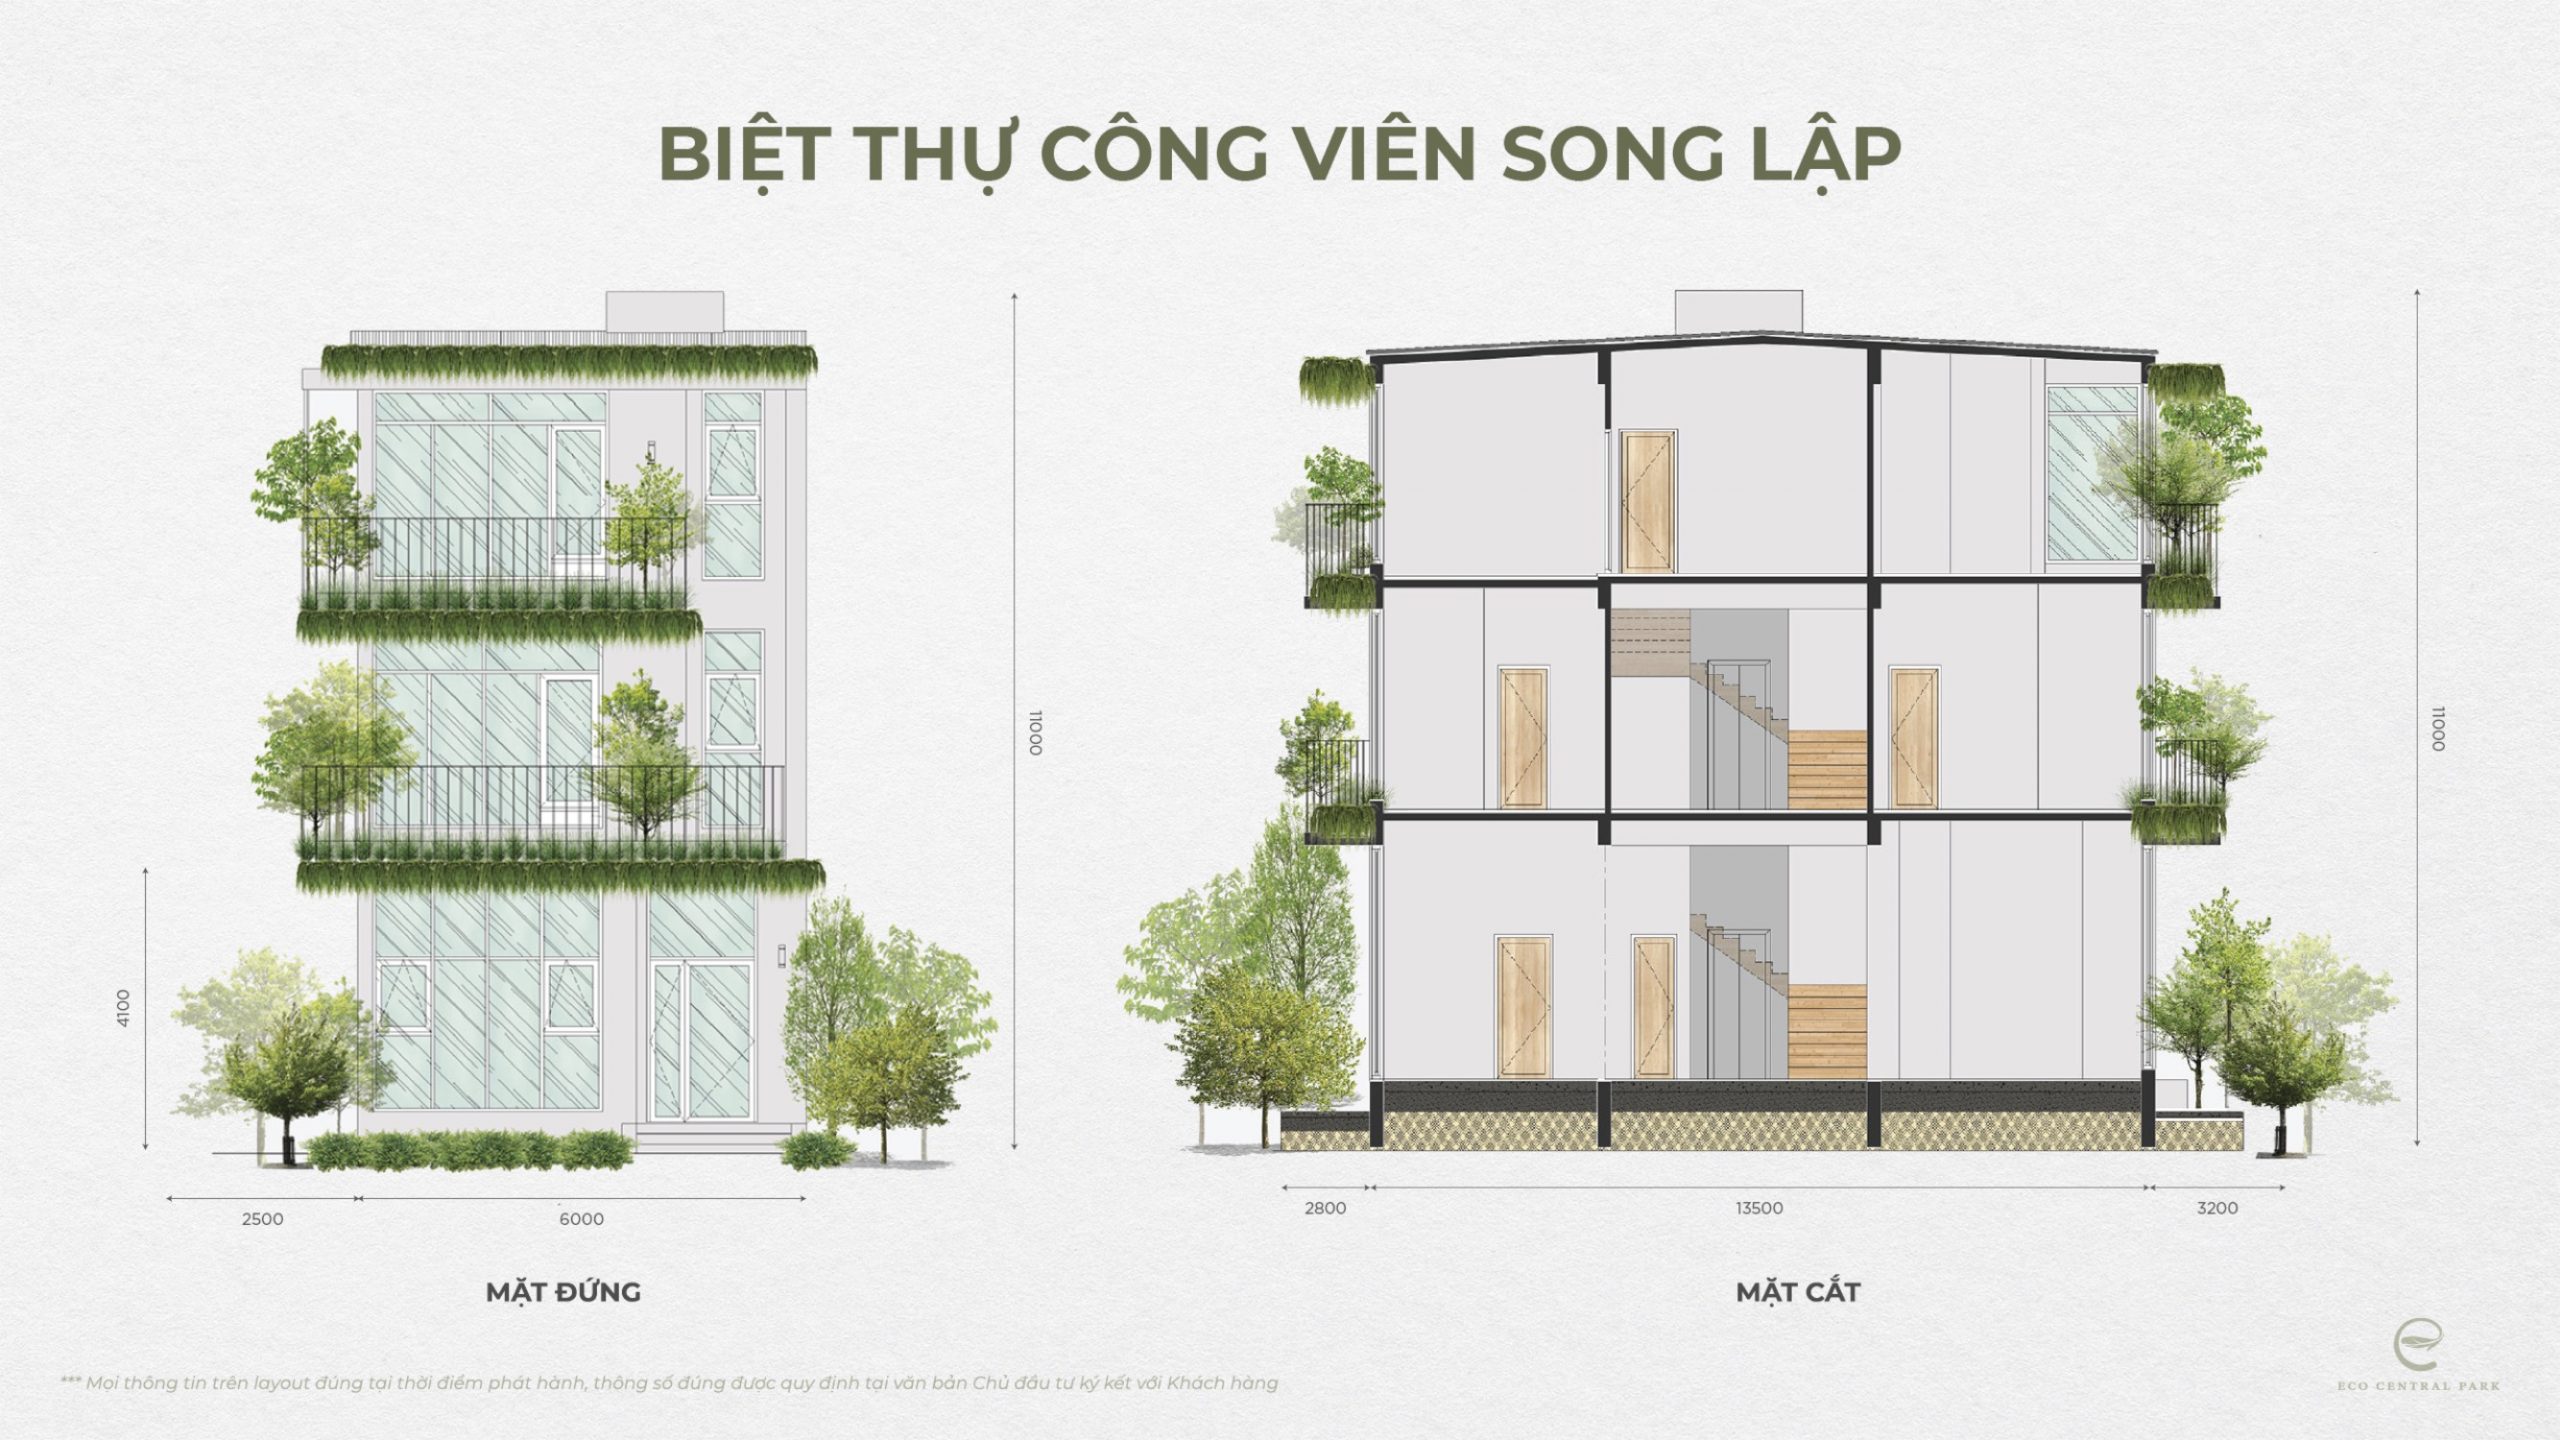 biệt thự song lập Eco Central Park